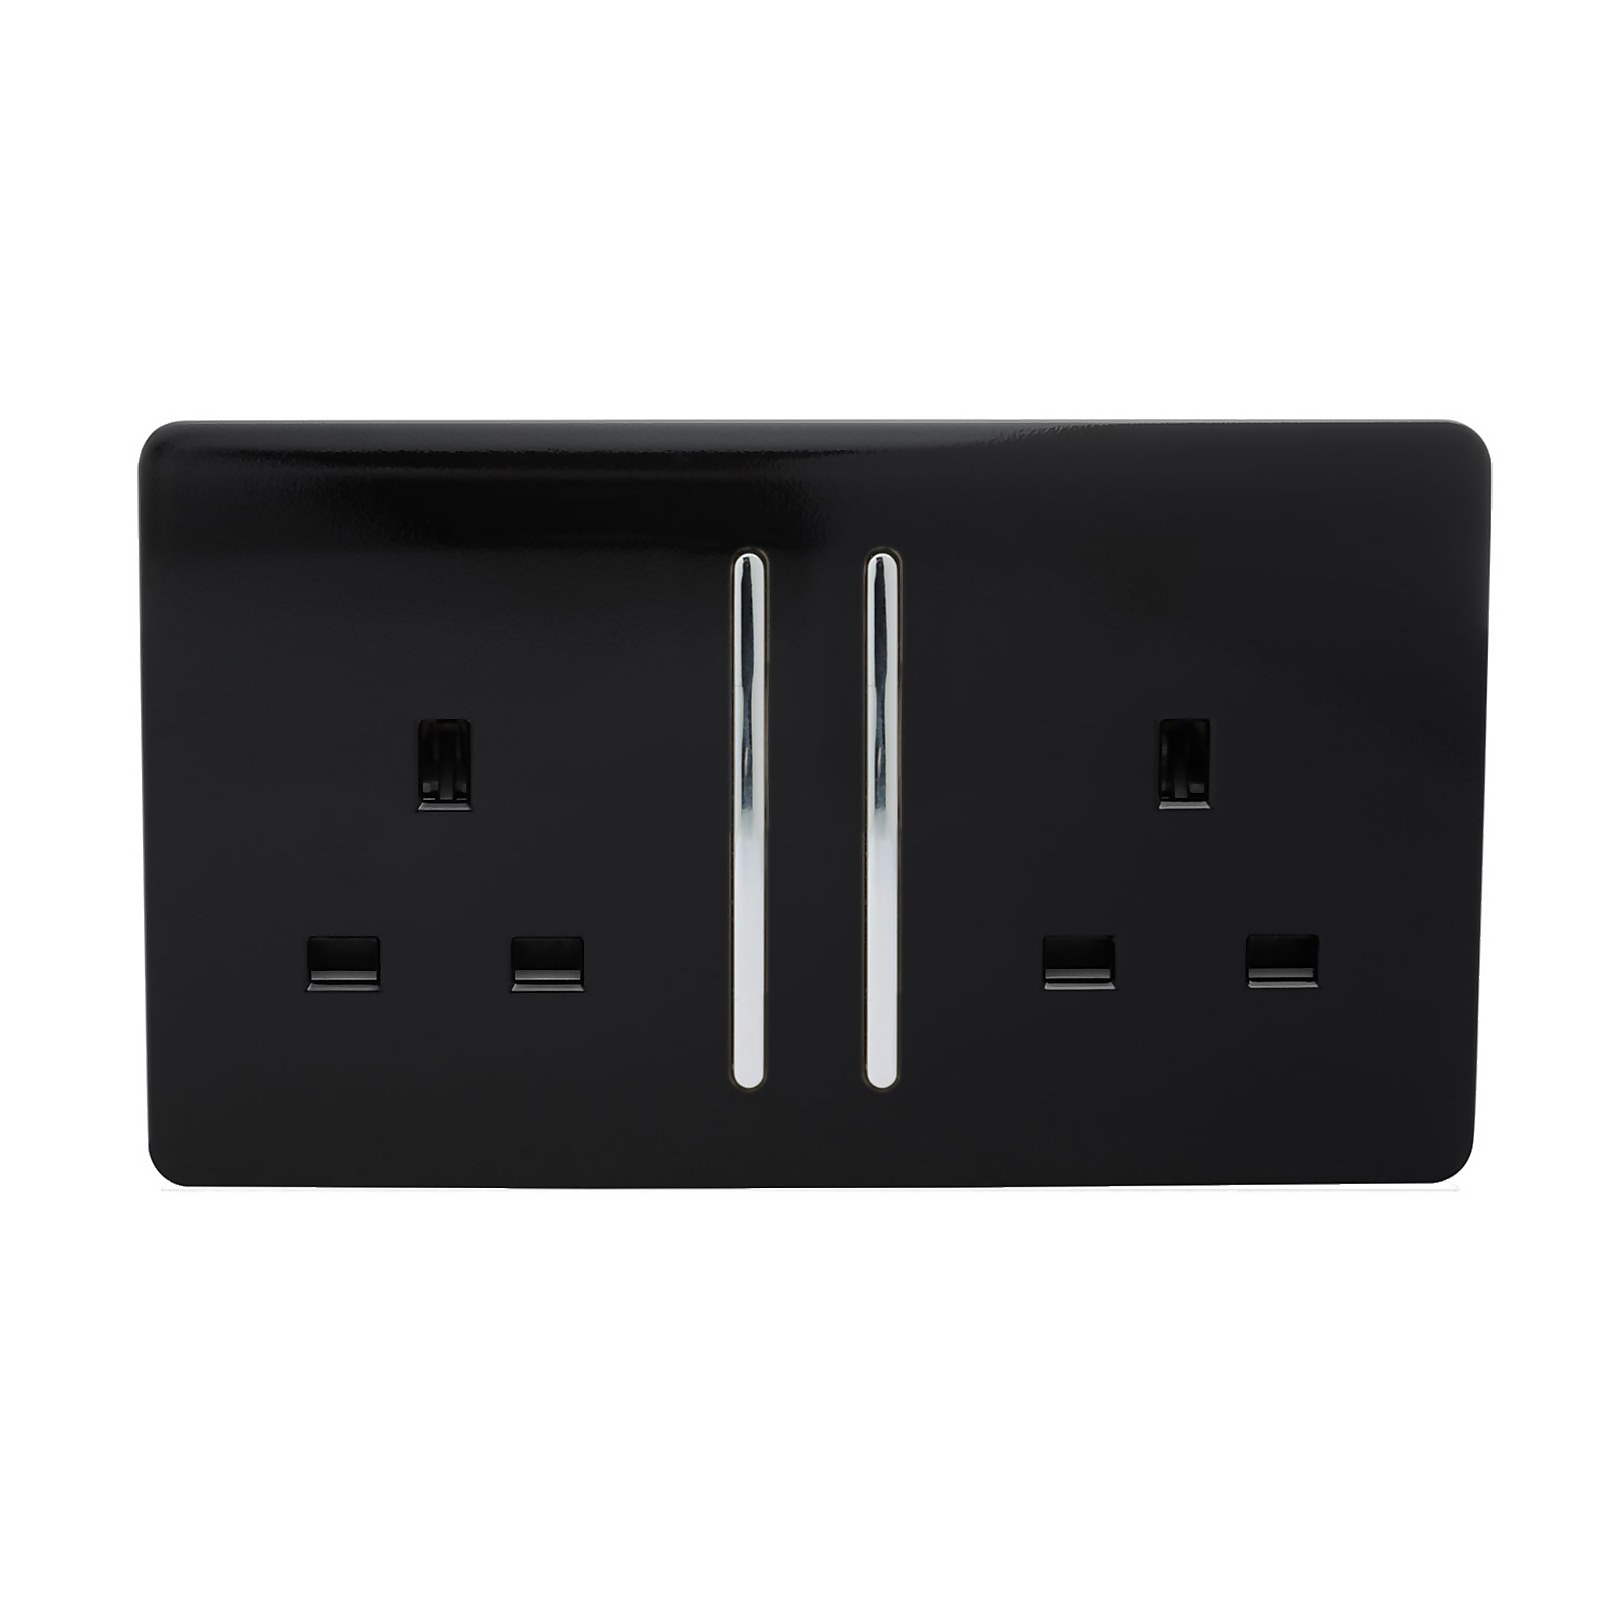 Photo of Trendi Switch 2 Gang 13 Amp Long Switched Plug Socket In Screwless Black